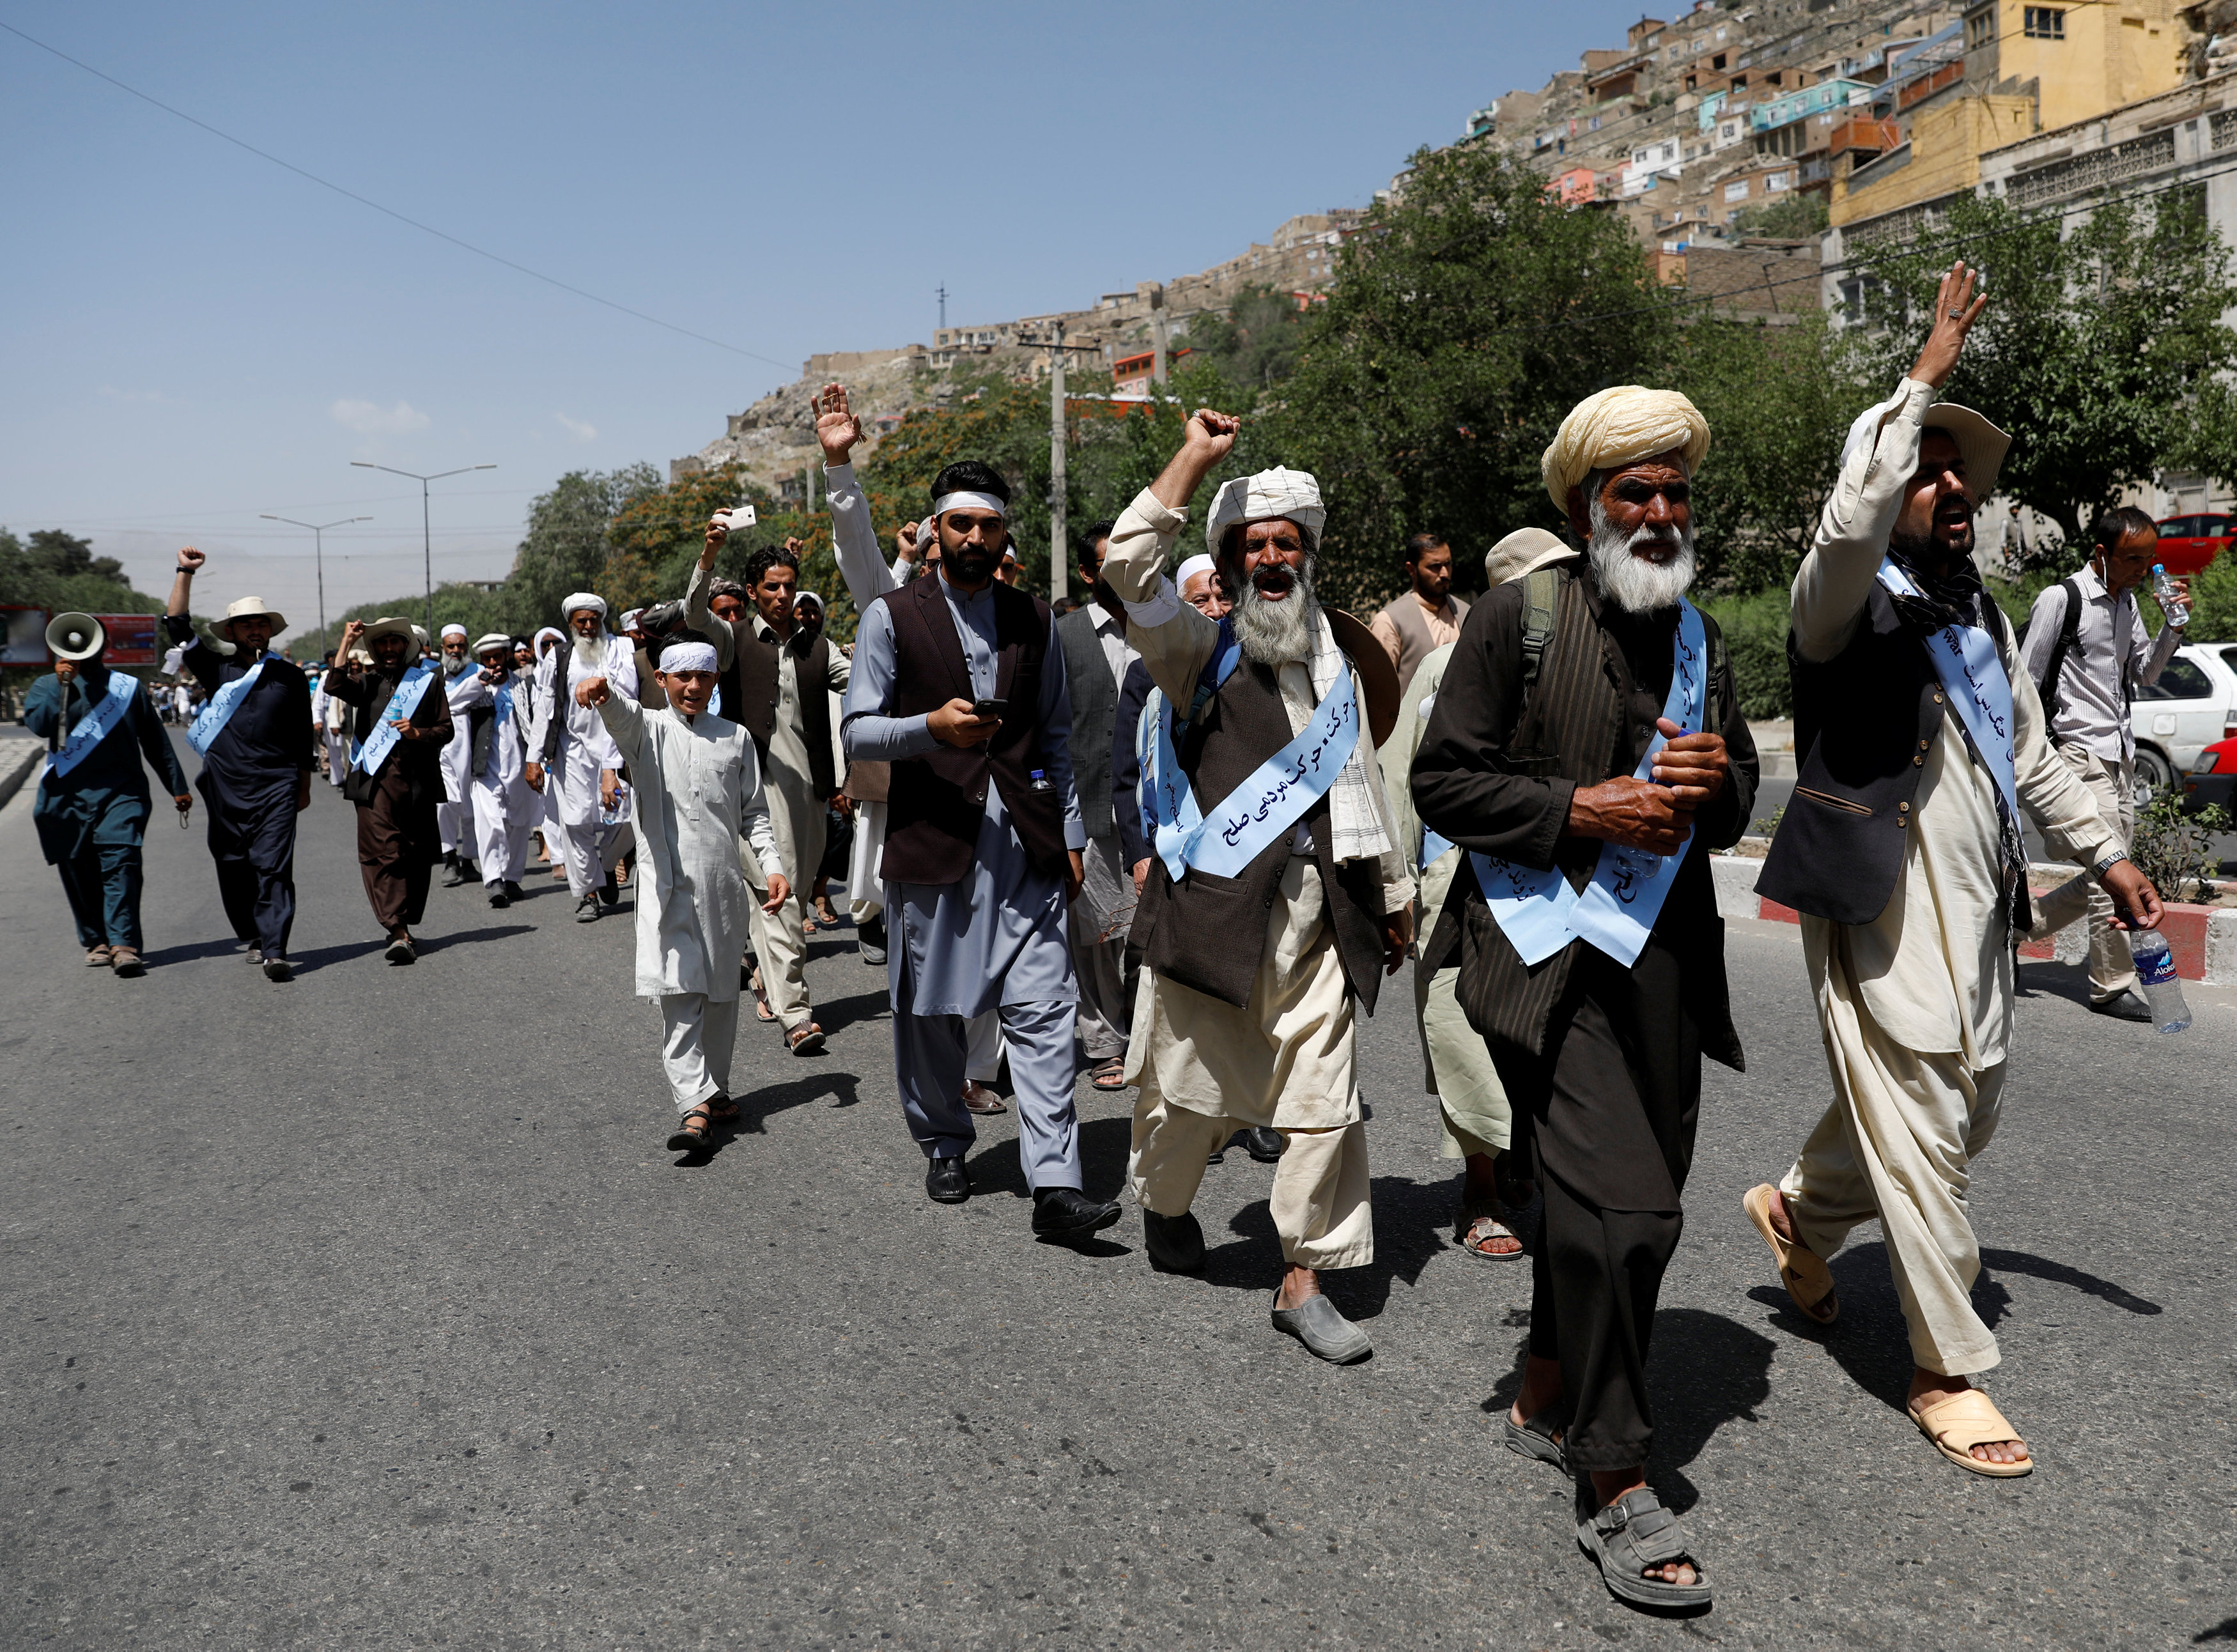 Afghans 'tired of war', say peace marchers in Kabul